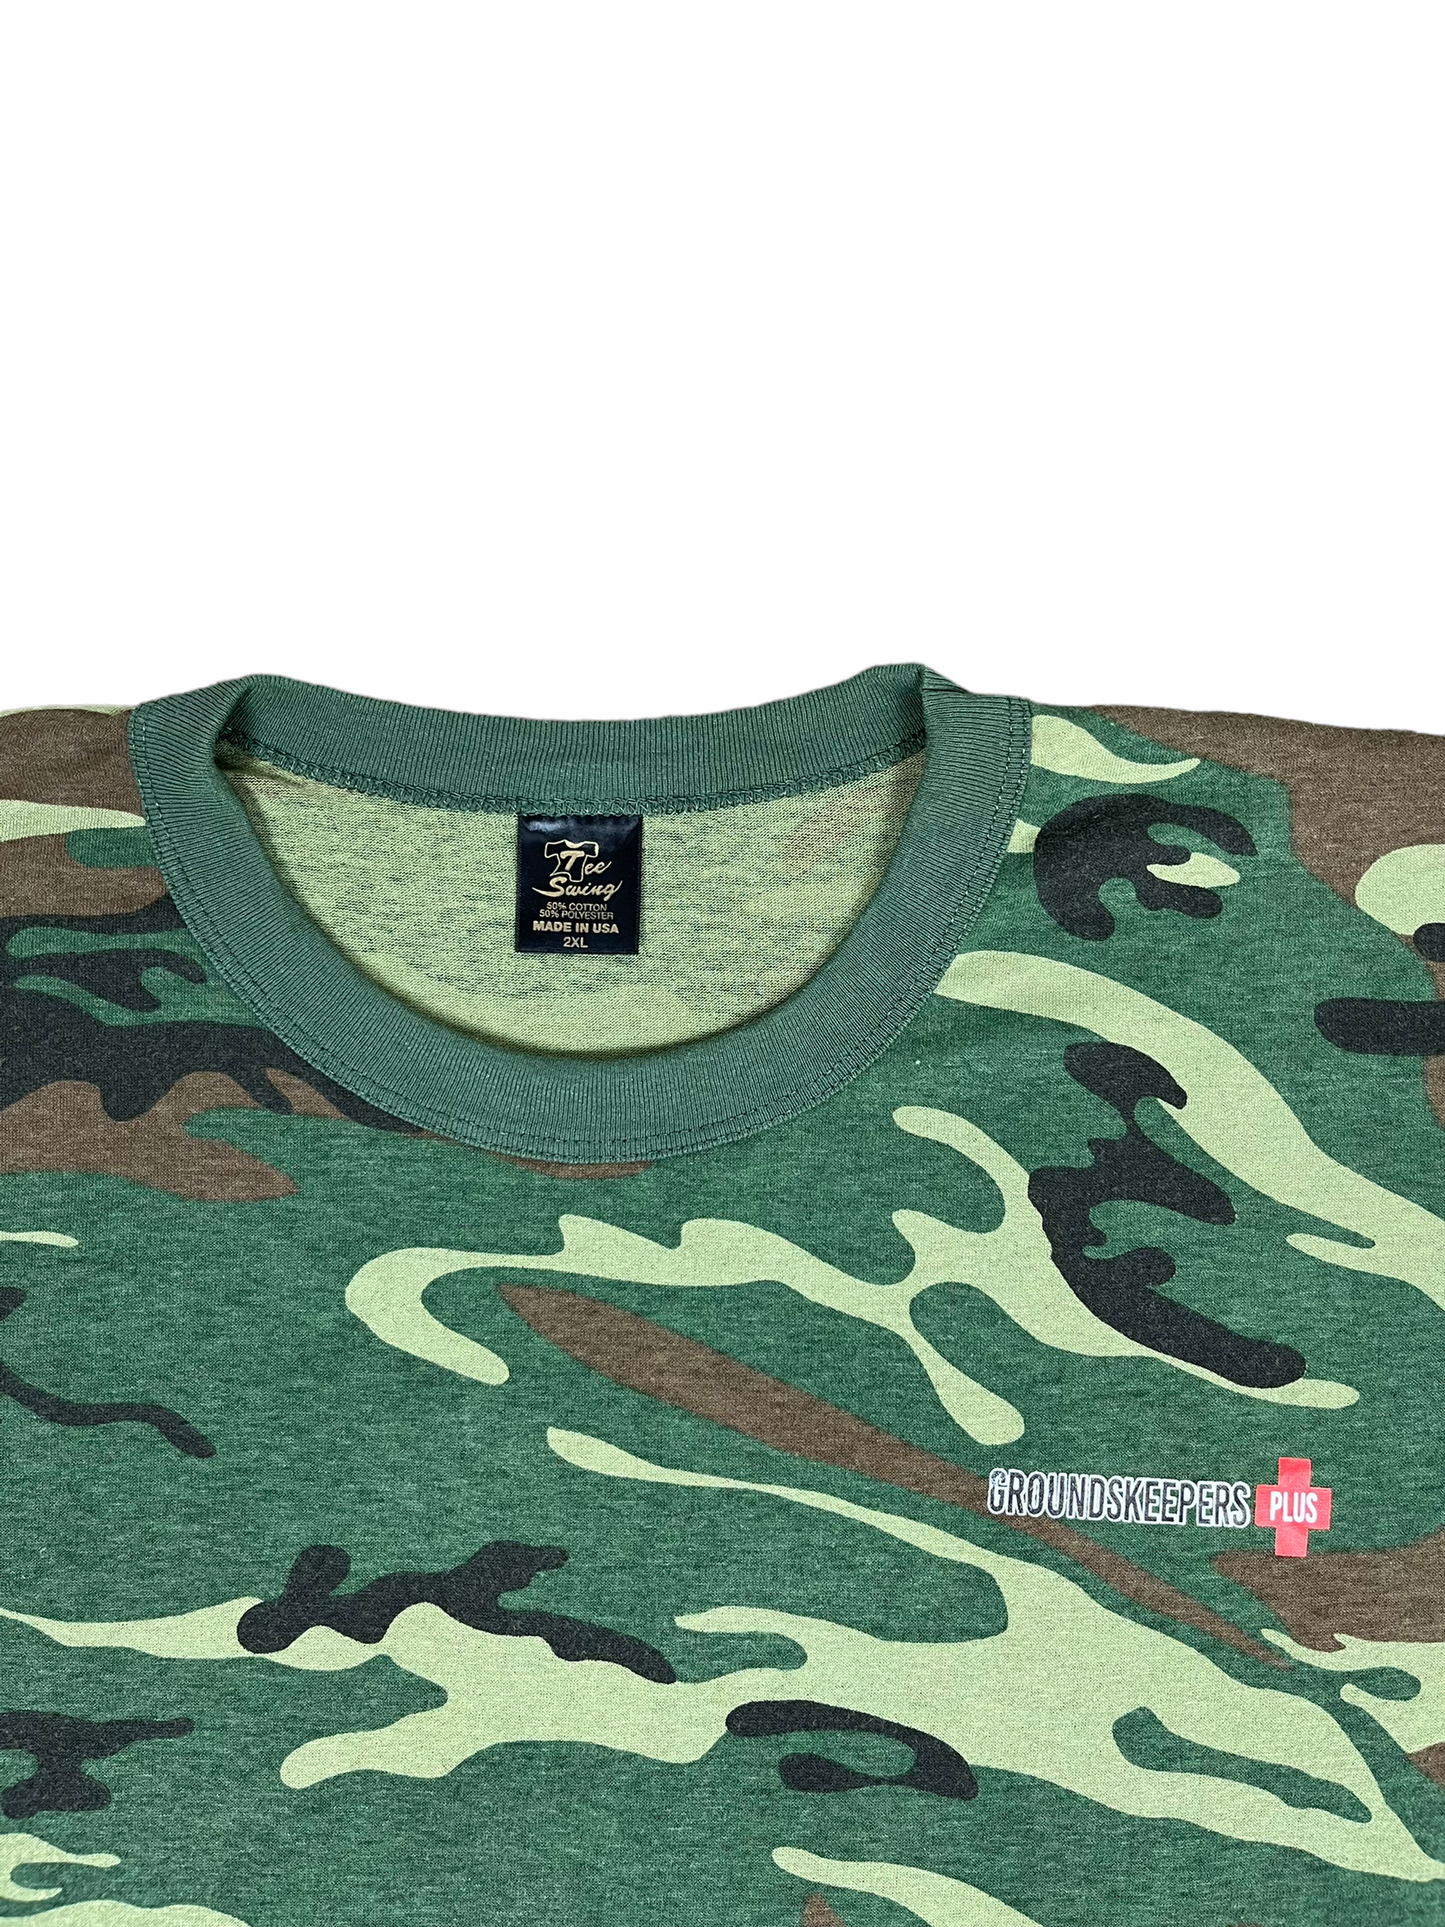 Vintage 90’s Groundkeepers Plus Camo T Shirt - XXL